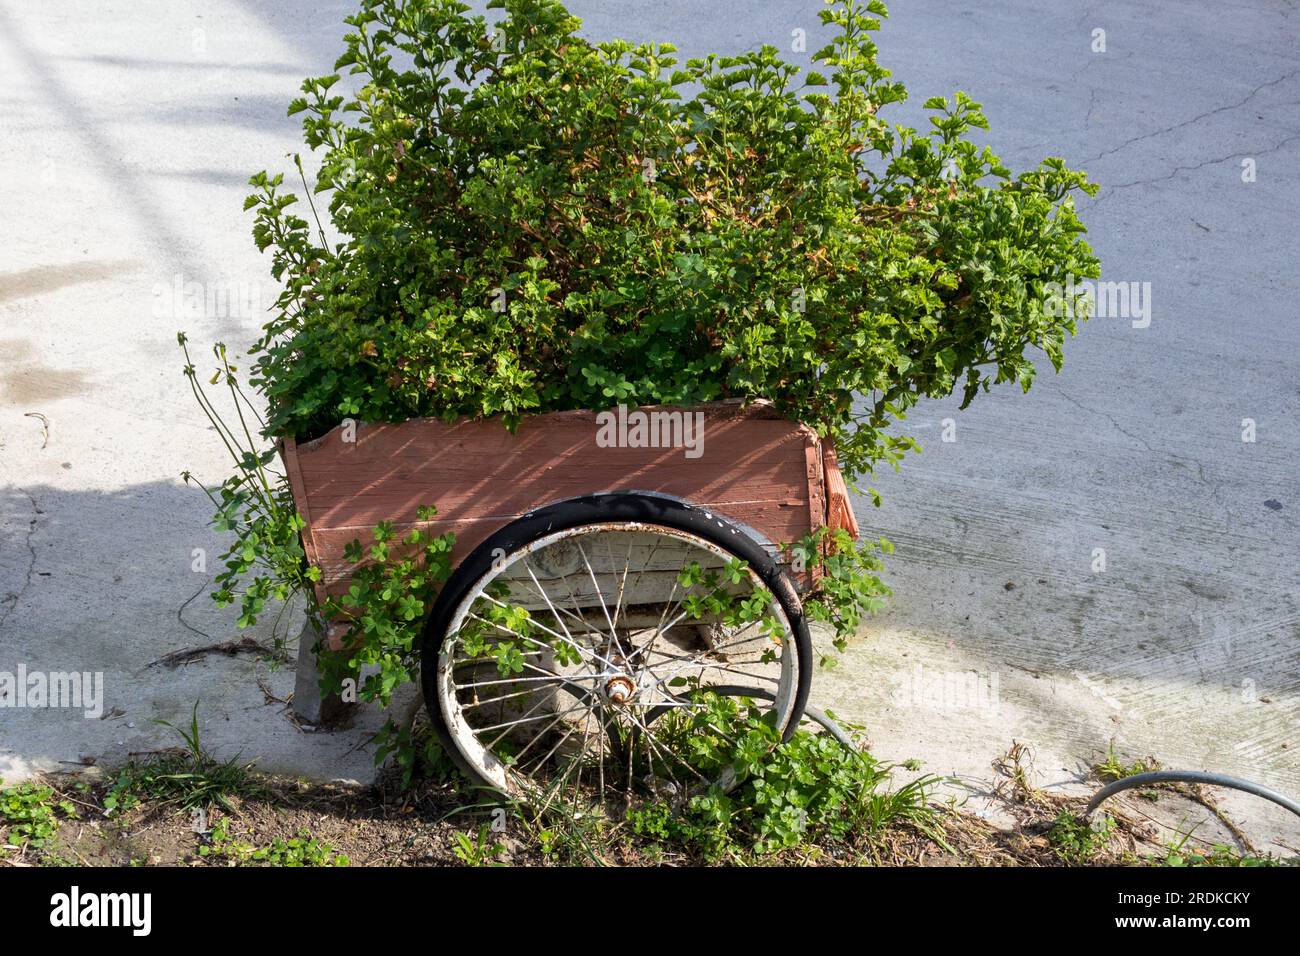 Old two-wheeled wagon that has been converted into a flower pot. Stock Photo